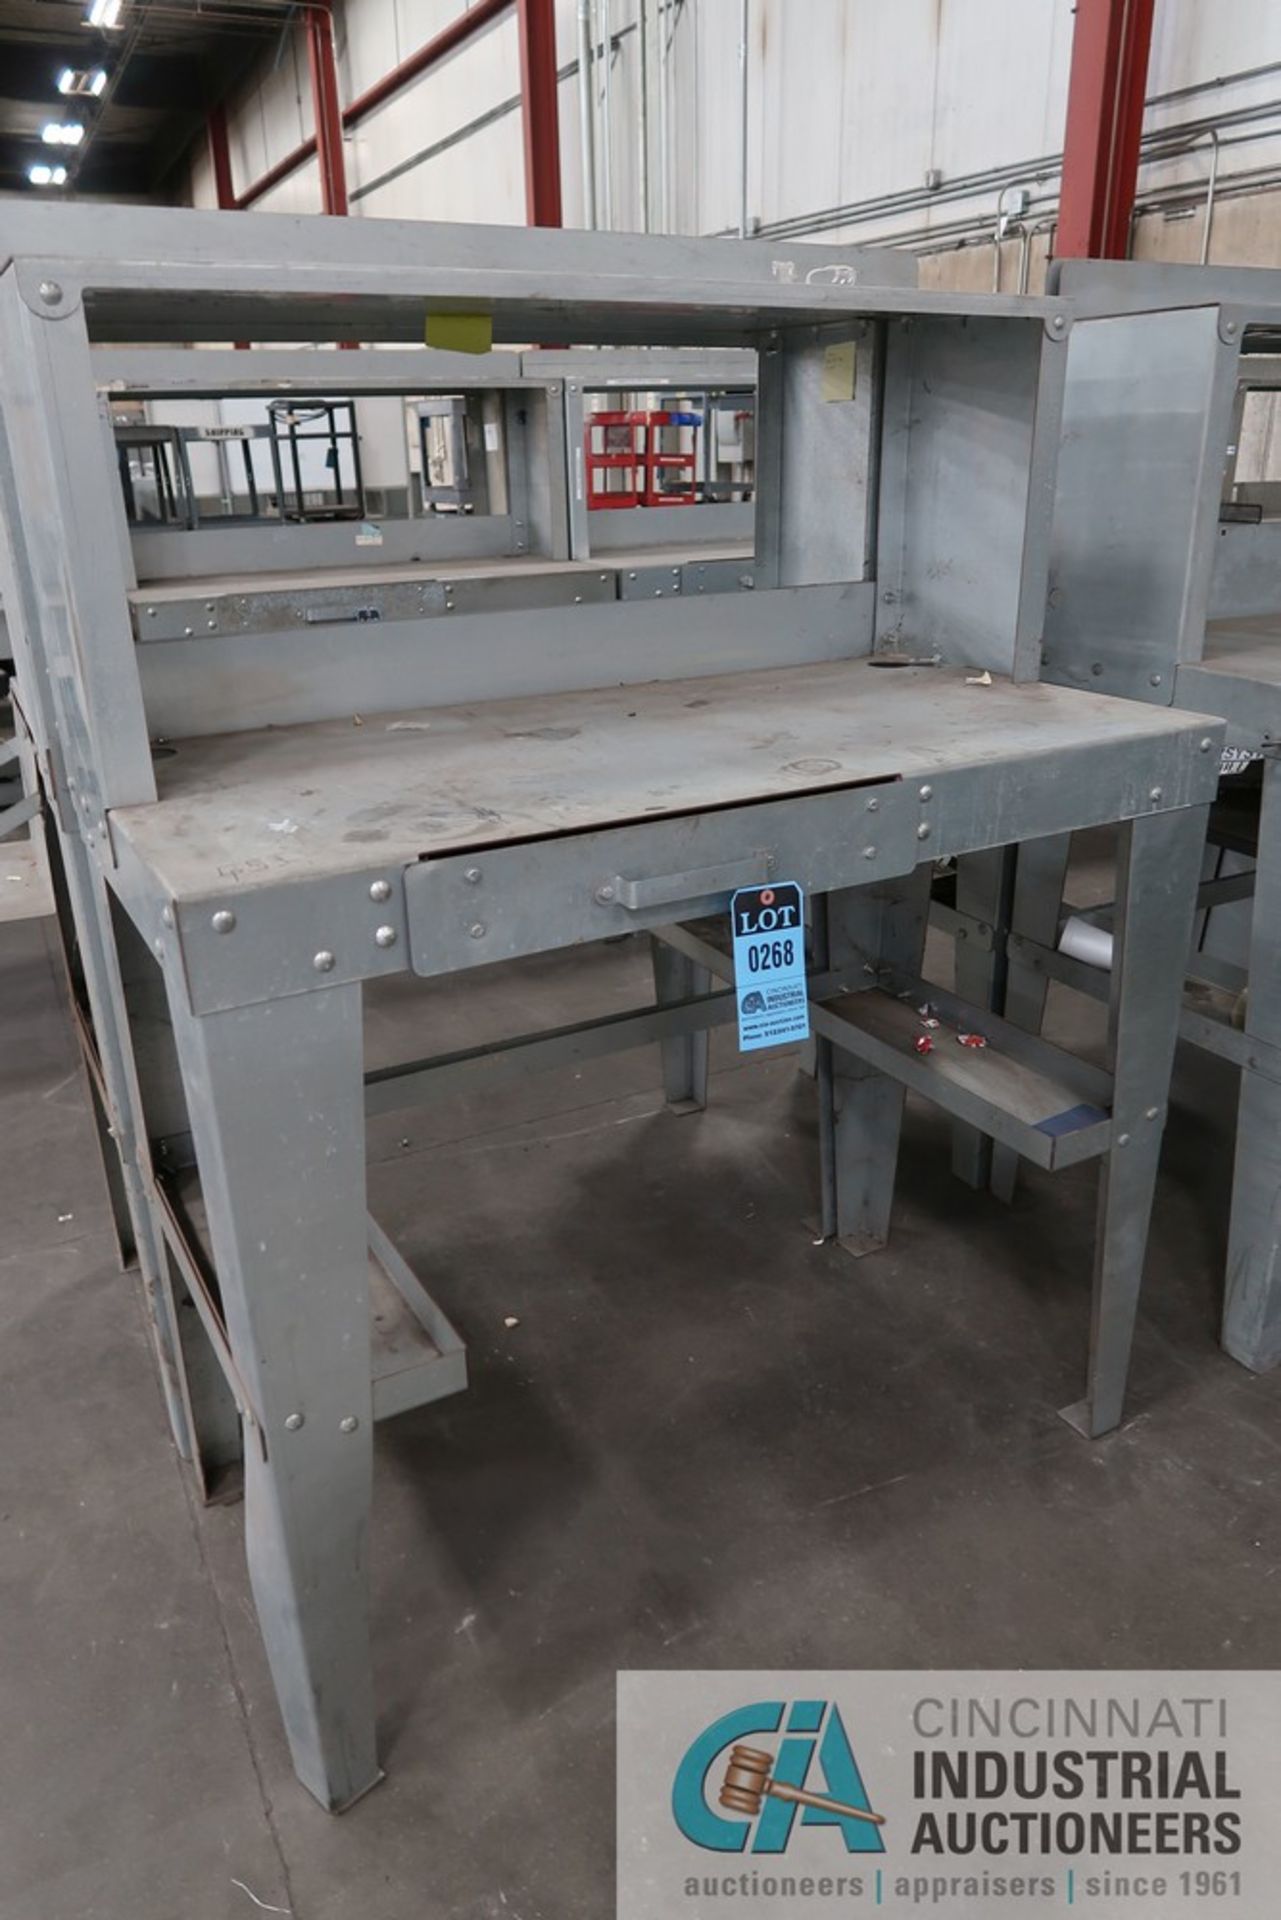 24" X 48" X 42" HIGH HEAVY DUTY GALVANIZED STEEL BOLT TOGETHER WORKBENCHES WITH 12" X 19" HIGH